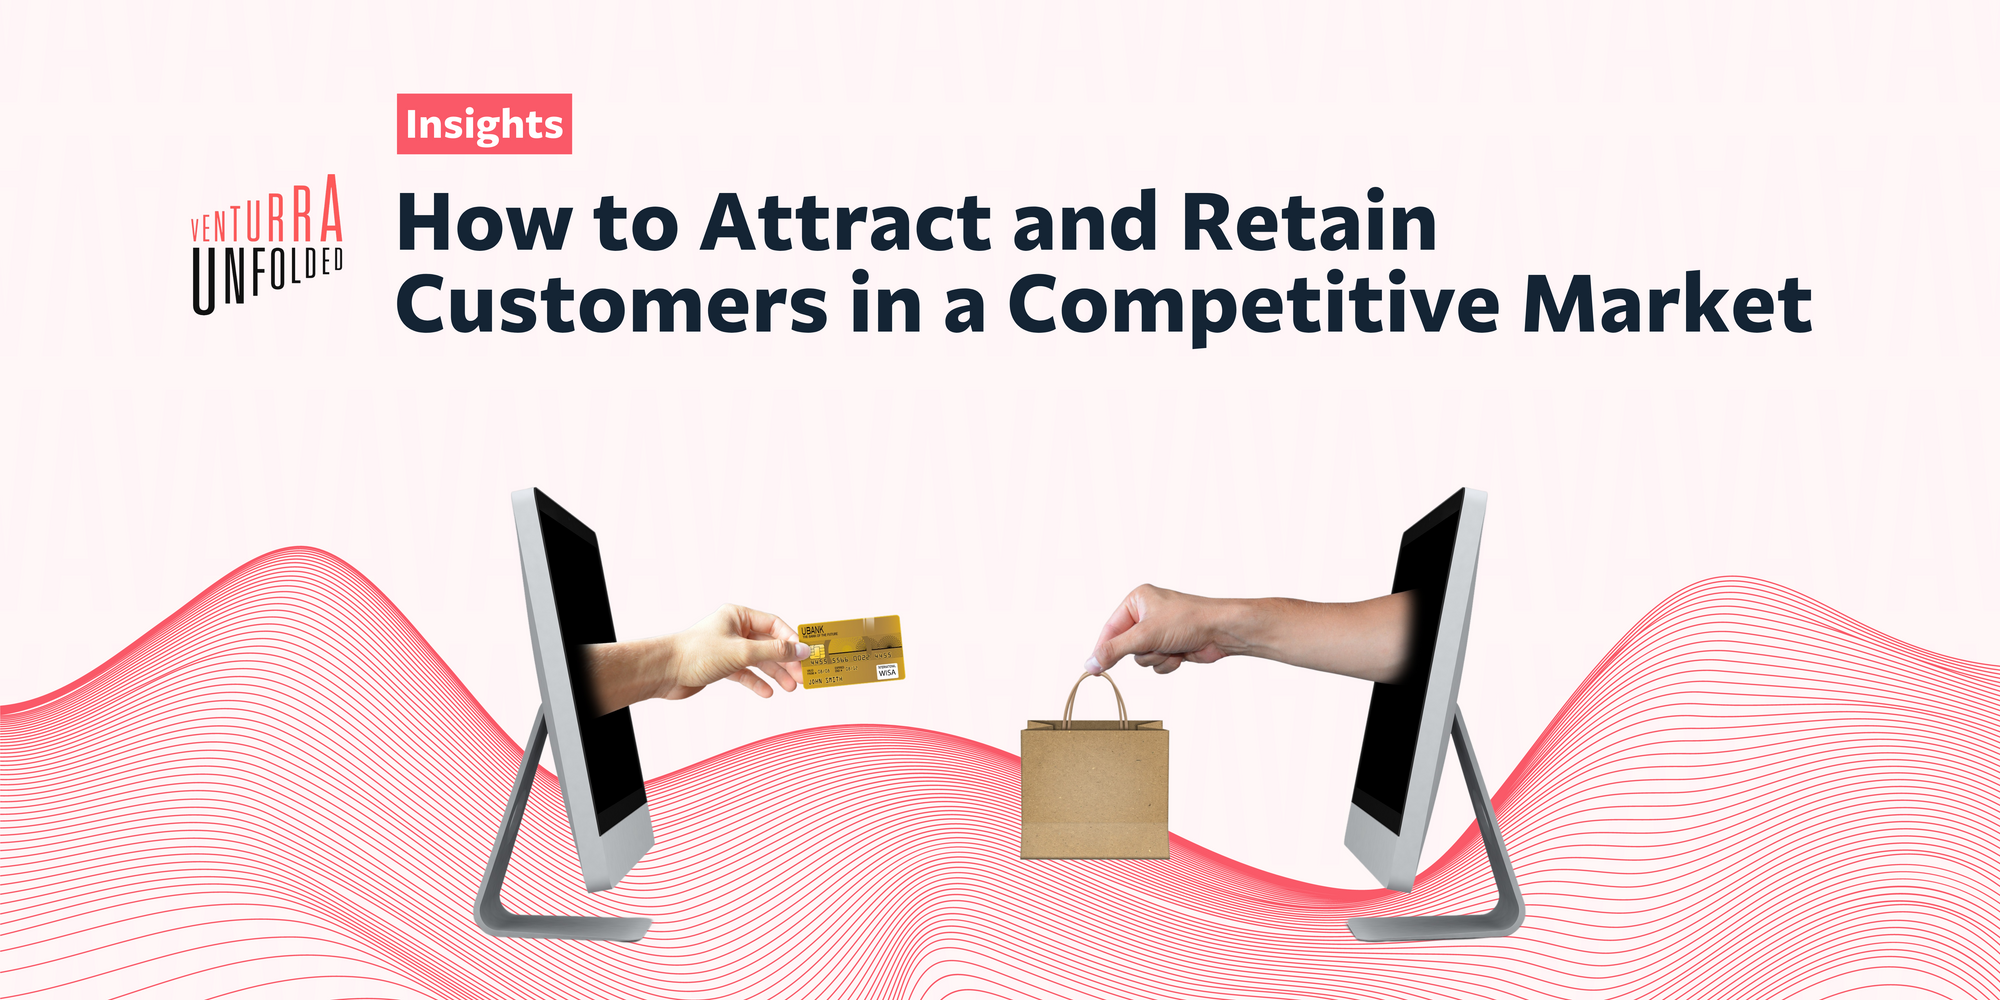 Customer Acquisition Strategies: How to Attract and Retain Customers in a Competitive Market